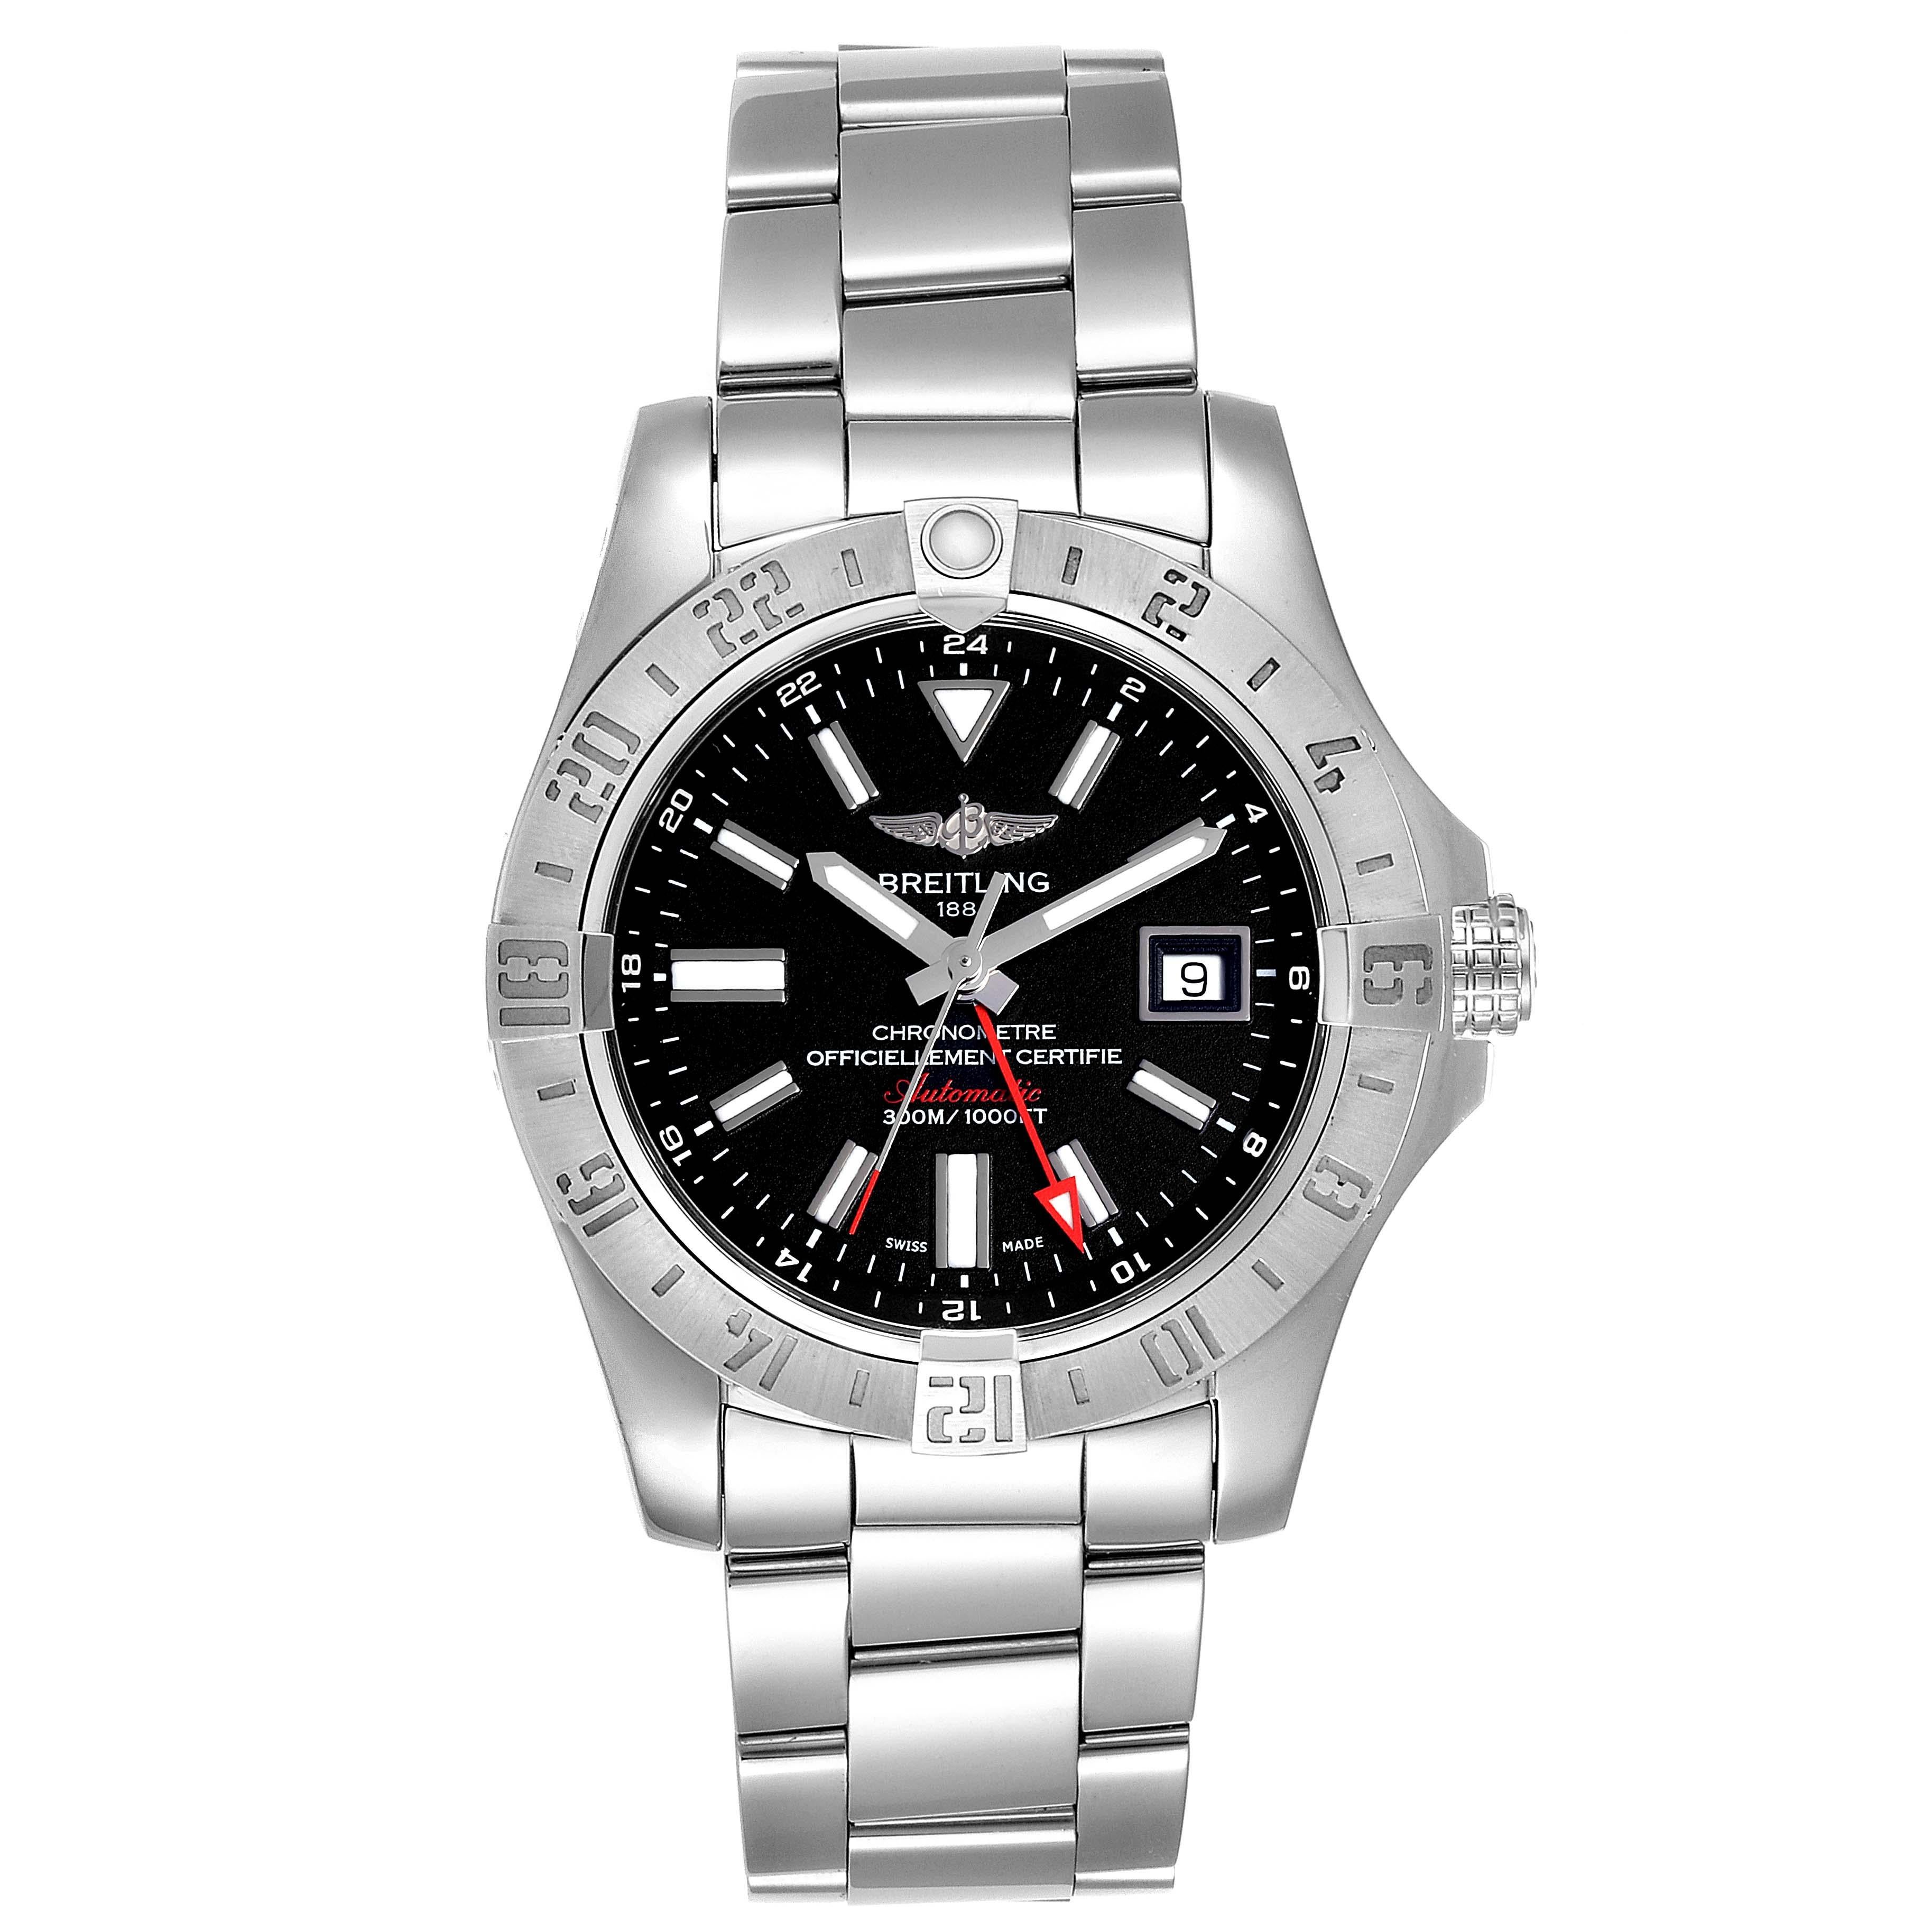 Breitling Aeromarine Avenger II GMT Black Dial Watch A32390 Box Papers. Automatic self-winding movement. Stainless steel case 42 mm in diameter with screw-down crown. Stainless steel bidirectional rotating bezel. 0-60 elapsed-time. Four 15 minute